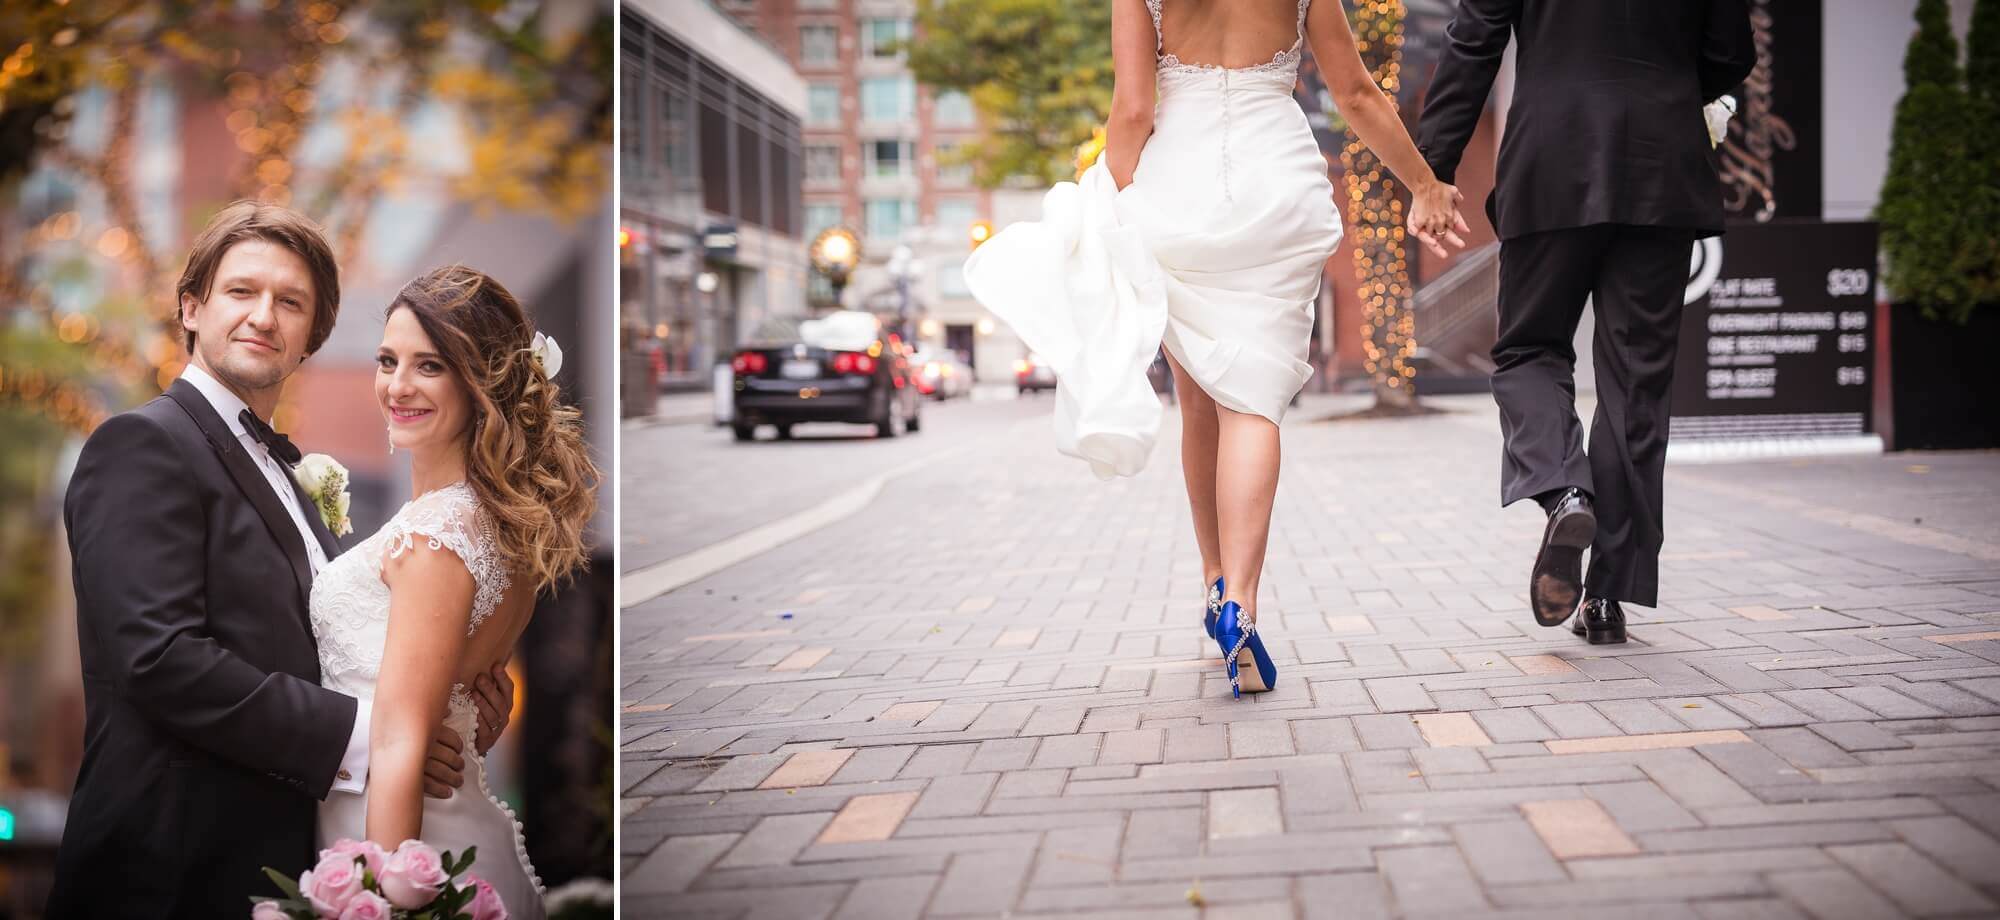 City details of the bride and groom's shoes as they walk down the streets of Yorkville, Toronto